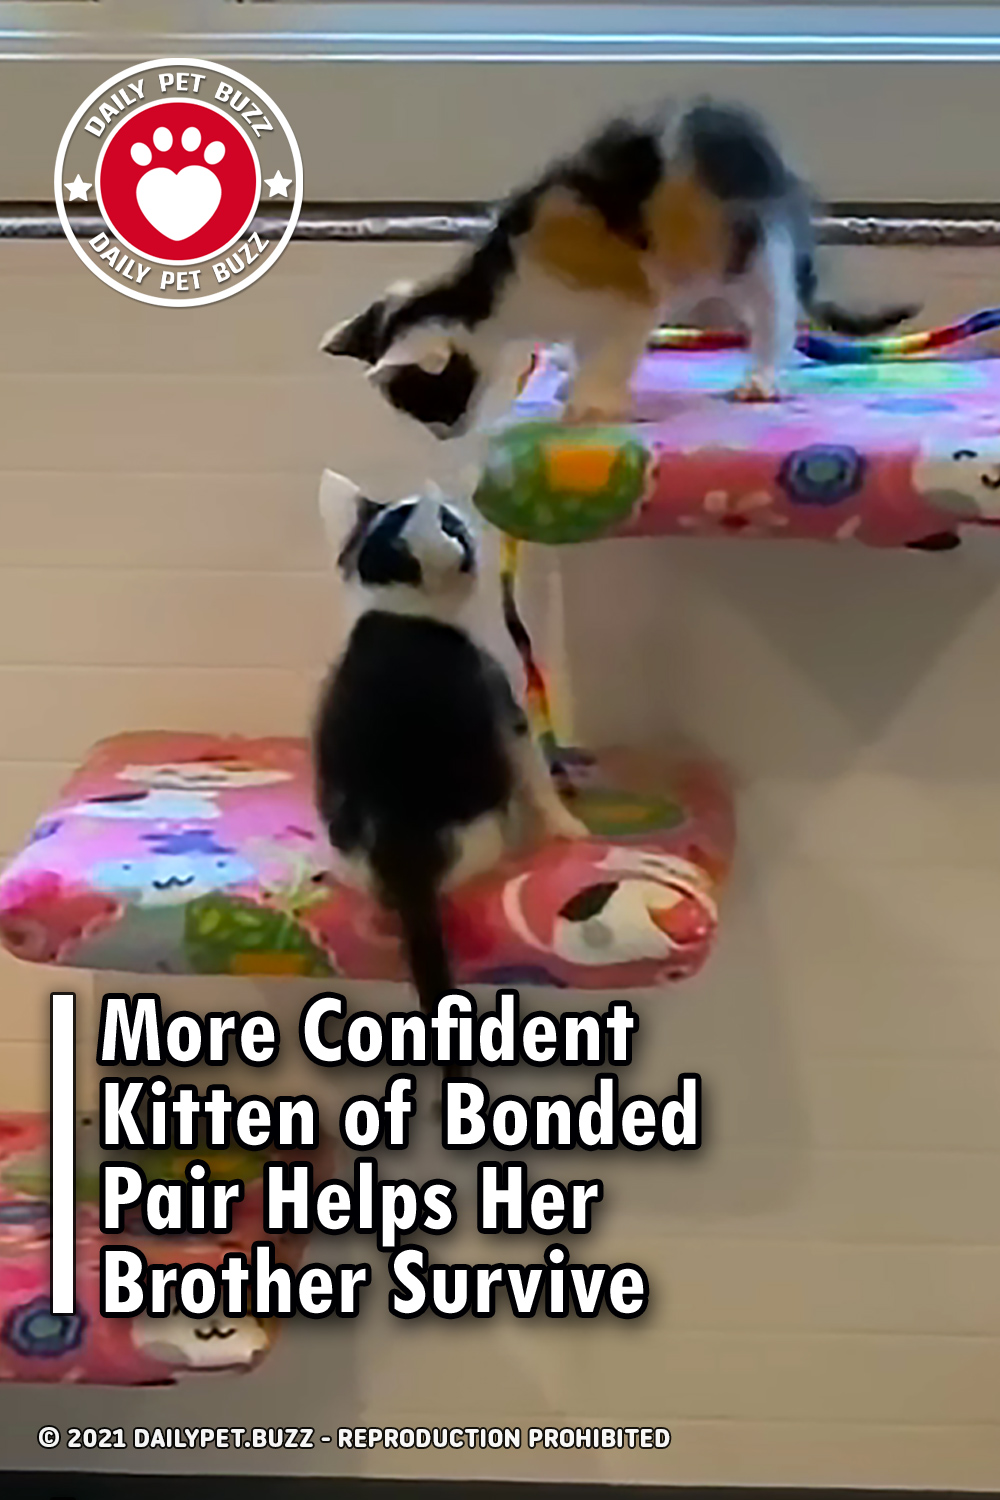 More Confident Kitten of Bonded Pair Helps Her Brother Survive